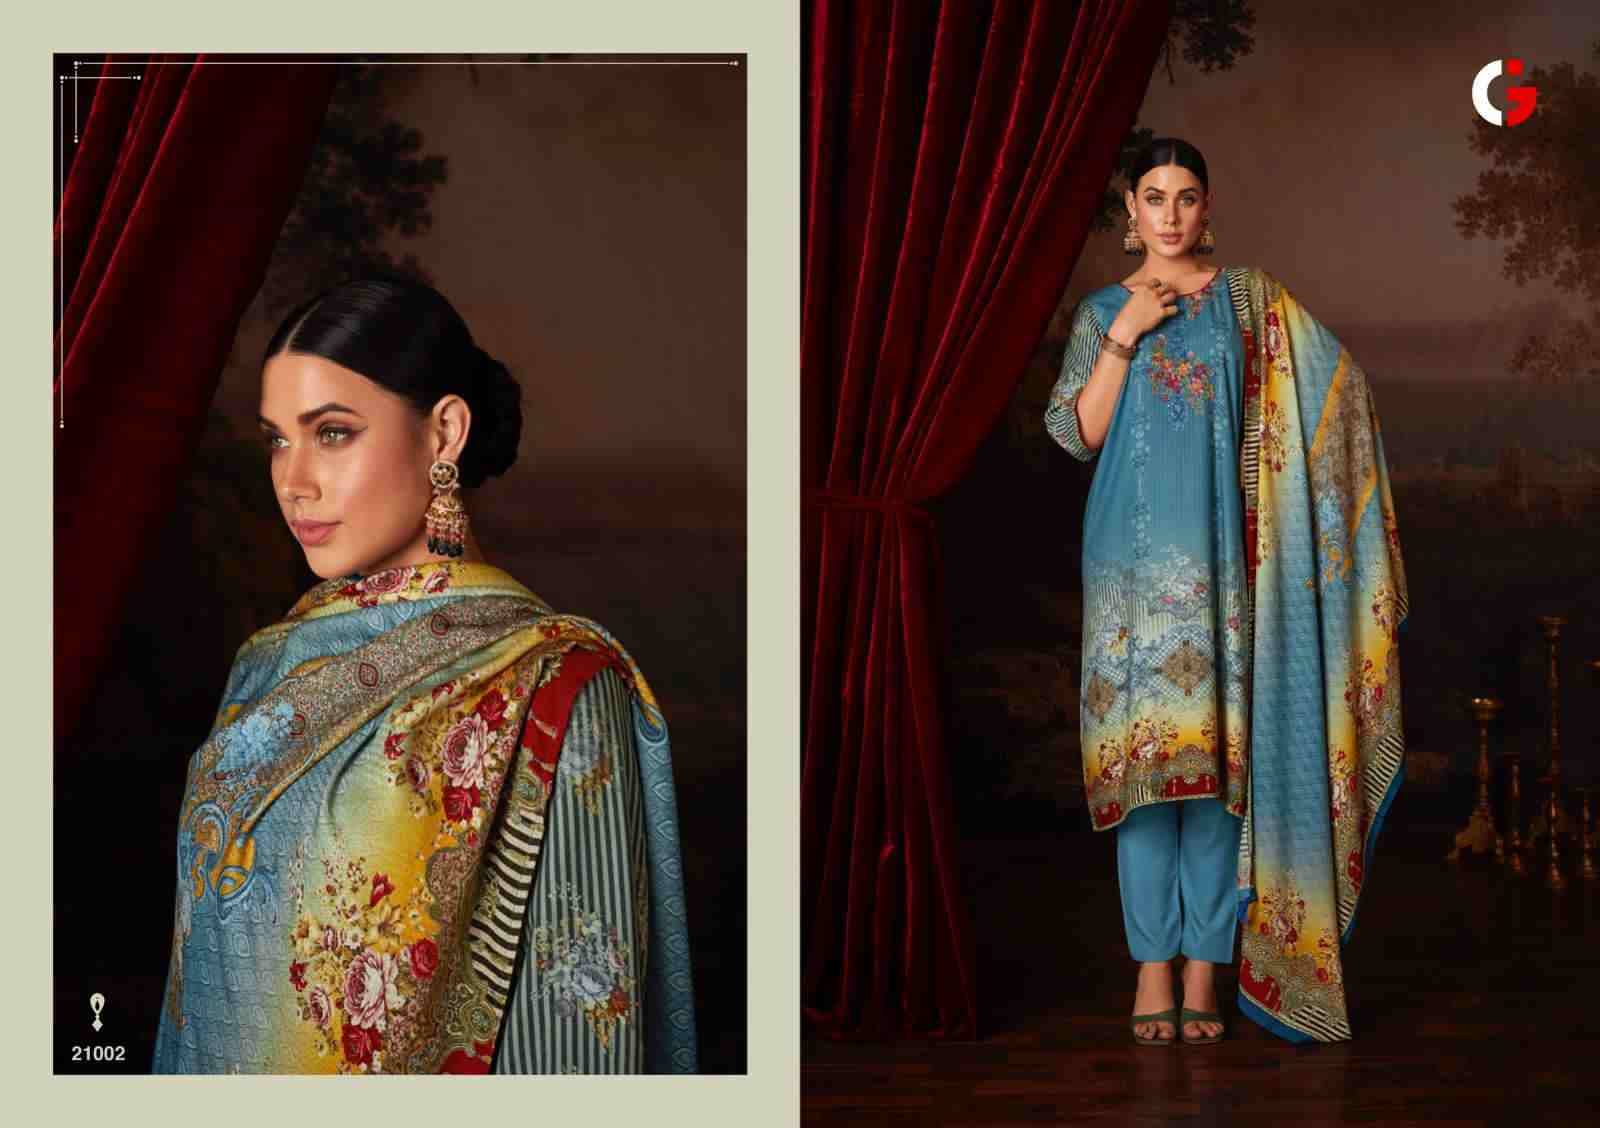 Dilkhush By Gull Jee 21001 To 21006 Series Beautiful Festive Suits Stylish Fancy Colorful Party Wear & Occasional Wear Viscose Pashmina Dresses At Wholesale Price